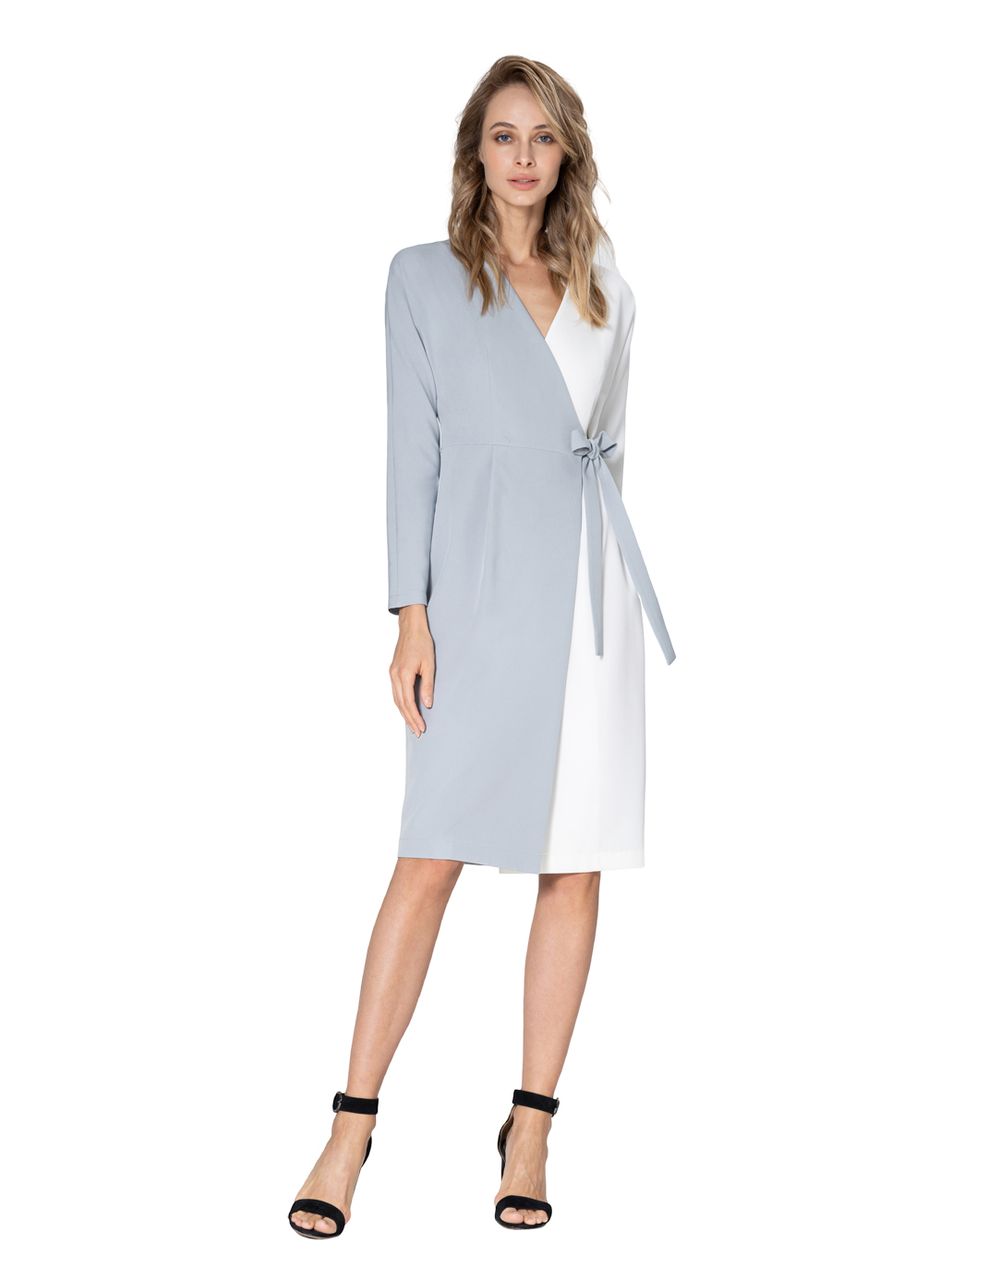 Elegant double-breasted dress with a one-piece long sleeve in a combination of pale gray and white suit fabric. Clasp for sewing on satin tight buttons and belt included.